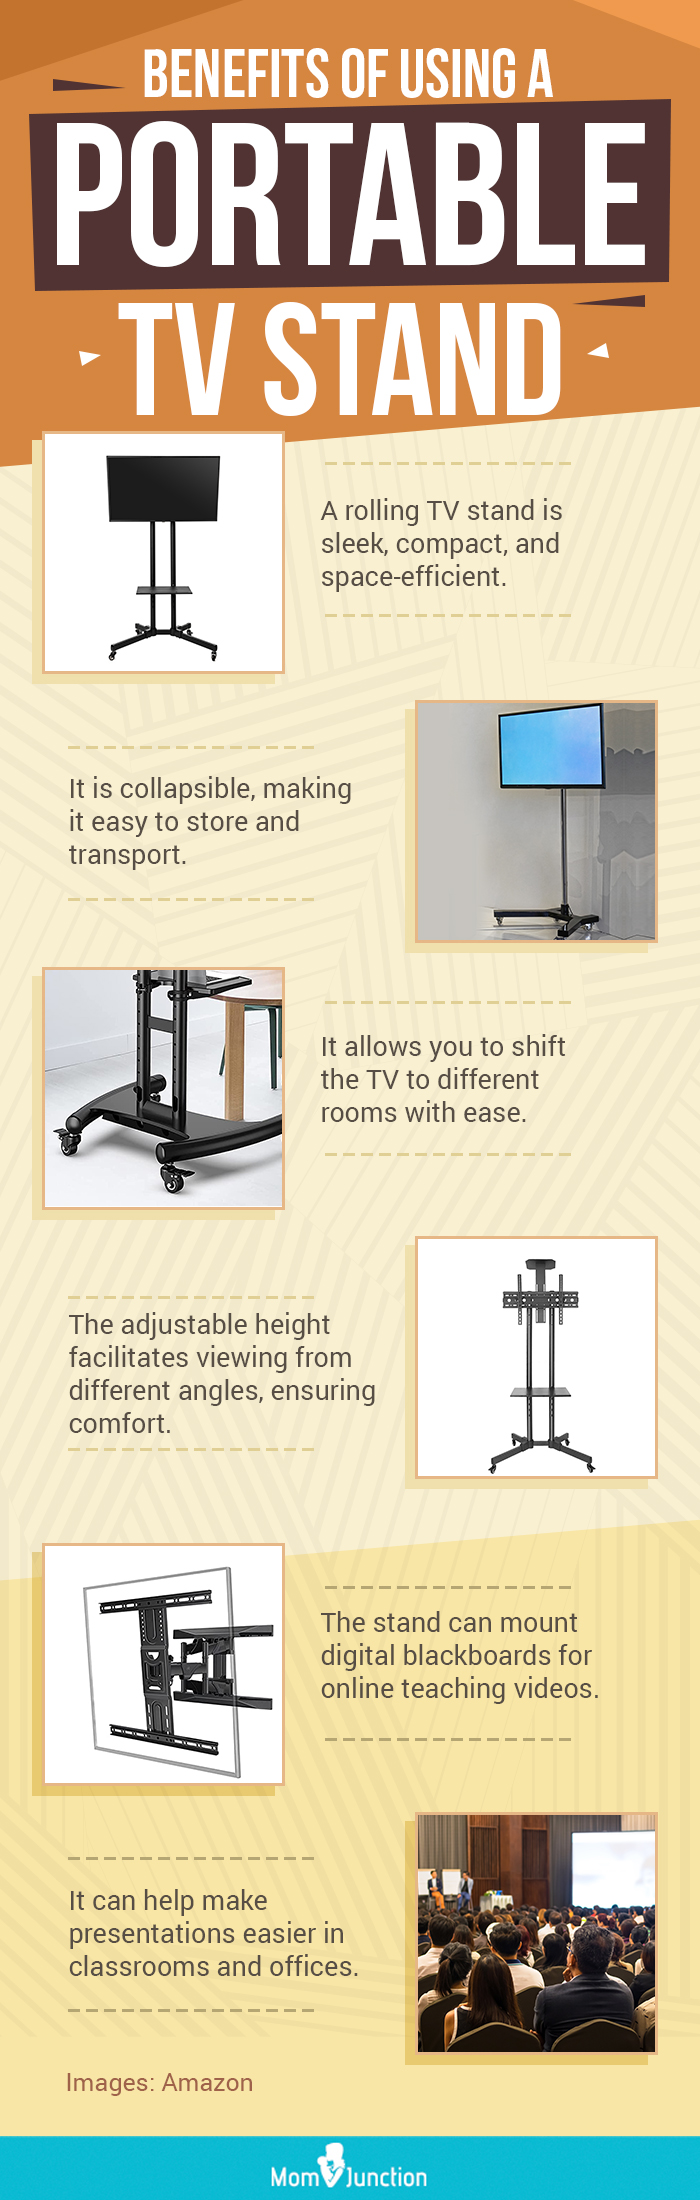 Benefits-Of-Using-A-Portable-TV-Stand(图)